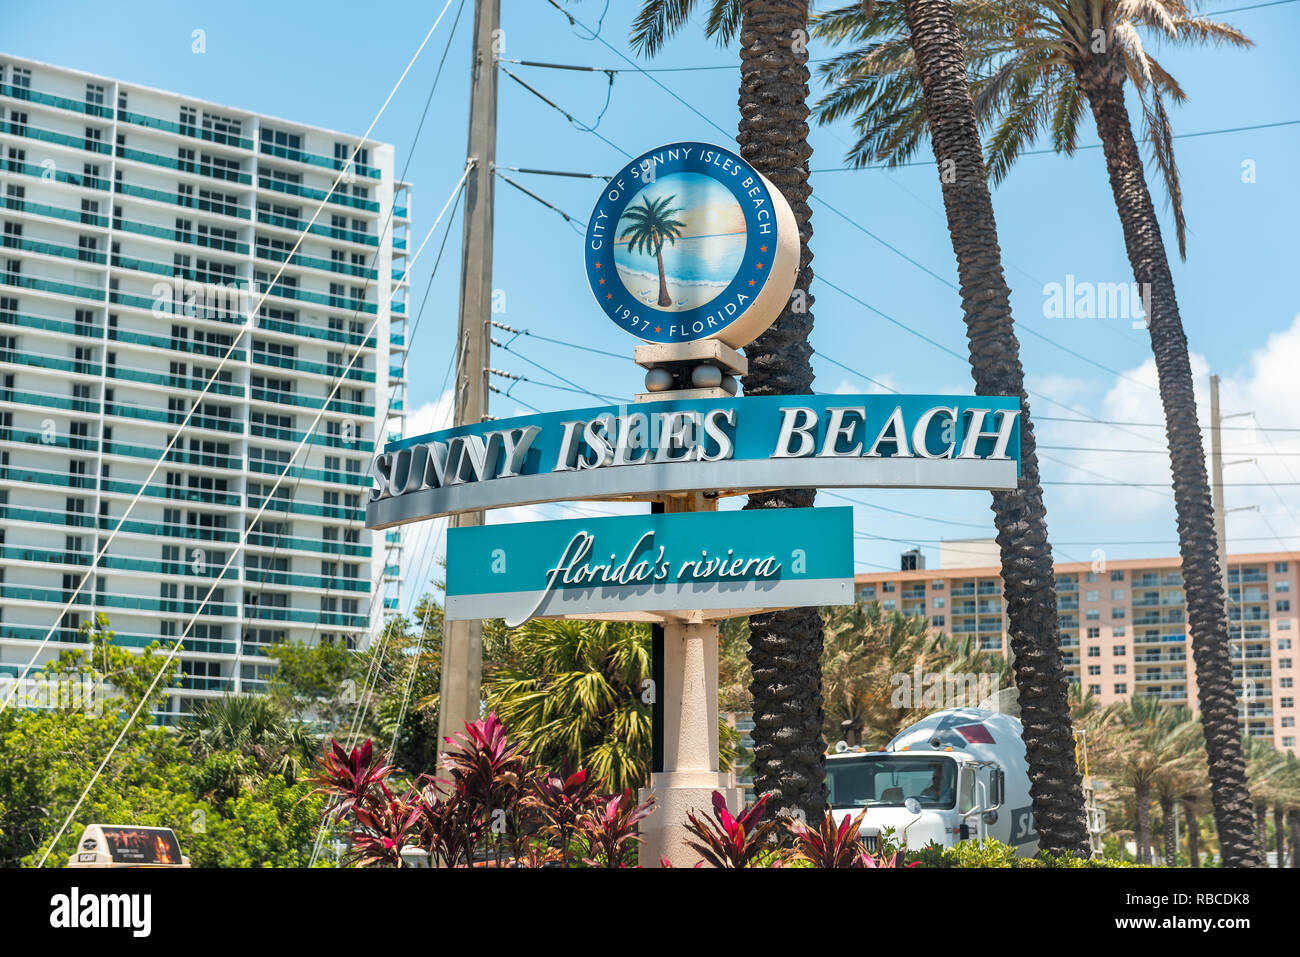 Sunny Isles Beach, USA - May 8, 2018: Sign for community city in North Miami, Florida, blue text on A1A Collins Avenue road street closeup Stock Photo